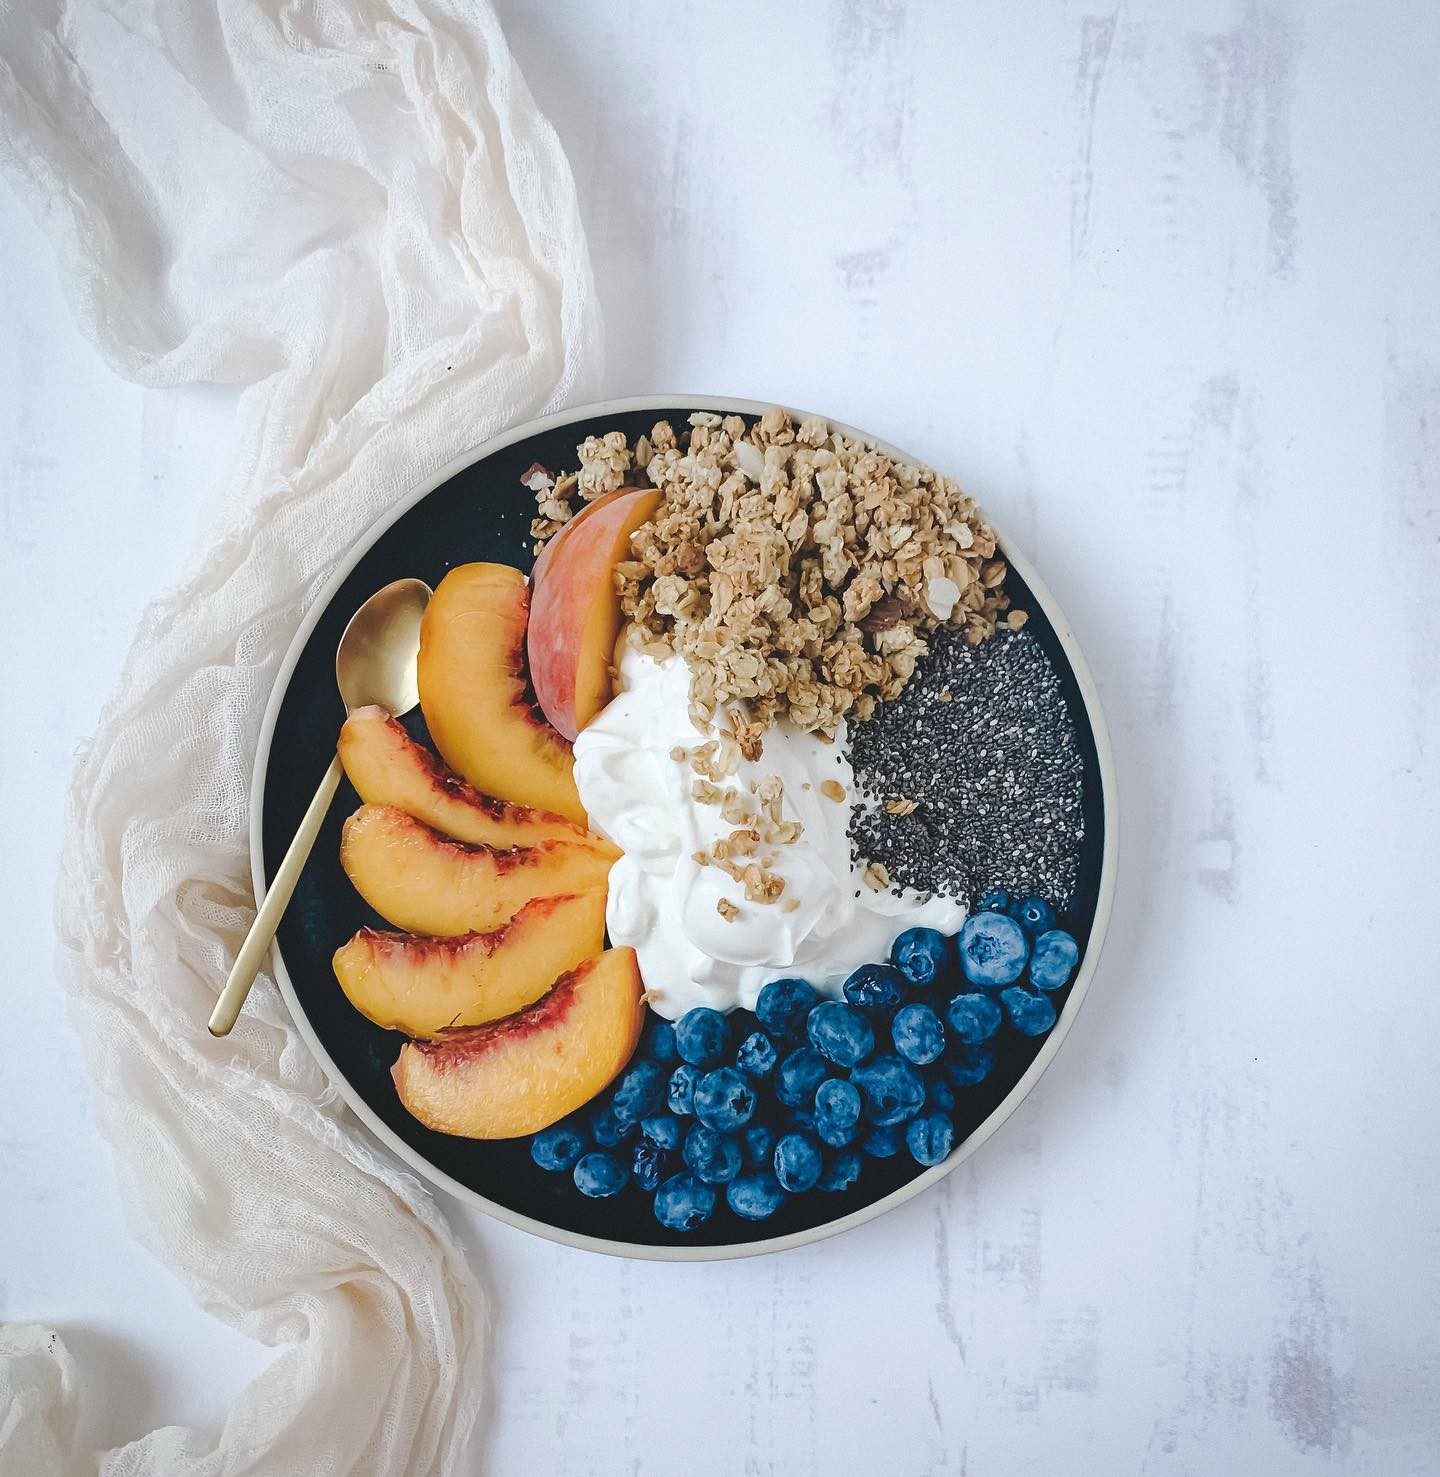 Weekends are usually for eggs benedict but since it’s January and I ate heavy cream in some form every day for a month, MAYBE it’s time for something healthy - like this, yogurt fruit and my homemade granola. 
.
.
.
#yummygoodness #homemadegranola #thebakefeed #deliciousfoods #imsomartha #eatprettythings #foodblogfeed #feedfeed #foodsofinstagram #recipesthatreallywork #getinmytummy #bakestagram #mycommontable #chicagofoodbloggers #tastesogood #makeitdelicious #eatingforinsta #huffposttaste #cameraeatsfirst #brunchideas #healthybreakfastideas #ourfoodstories #foodtographyschool #foodfluffer #f52grams #gloobyfood #hereismyfood #foodstagram #foodgawker #flatlayoftheday